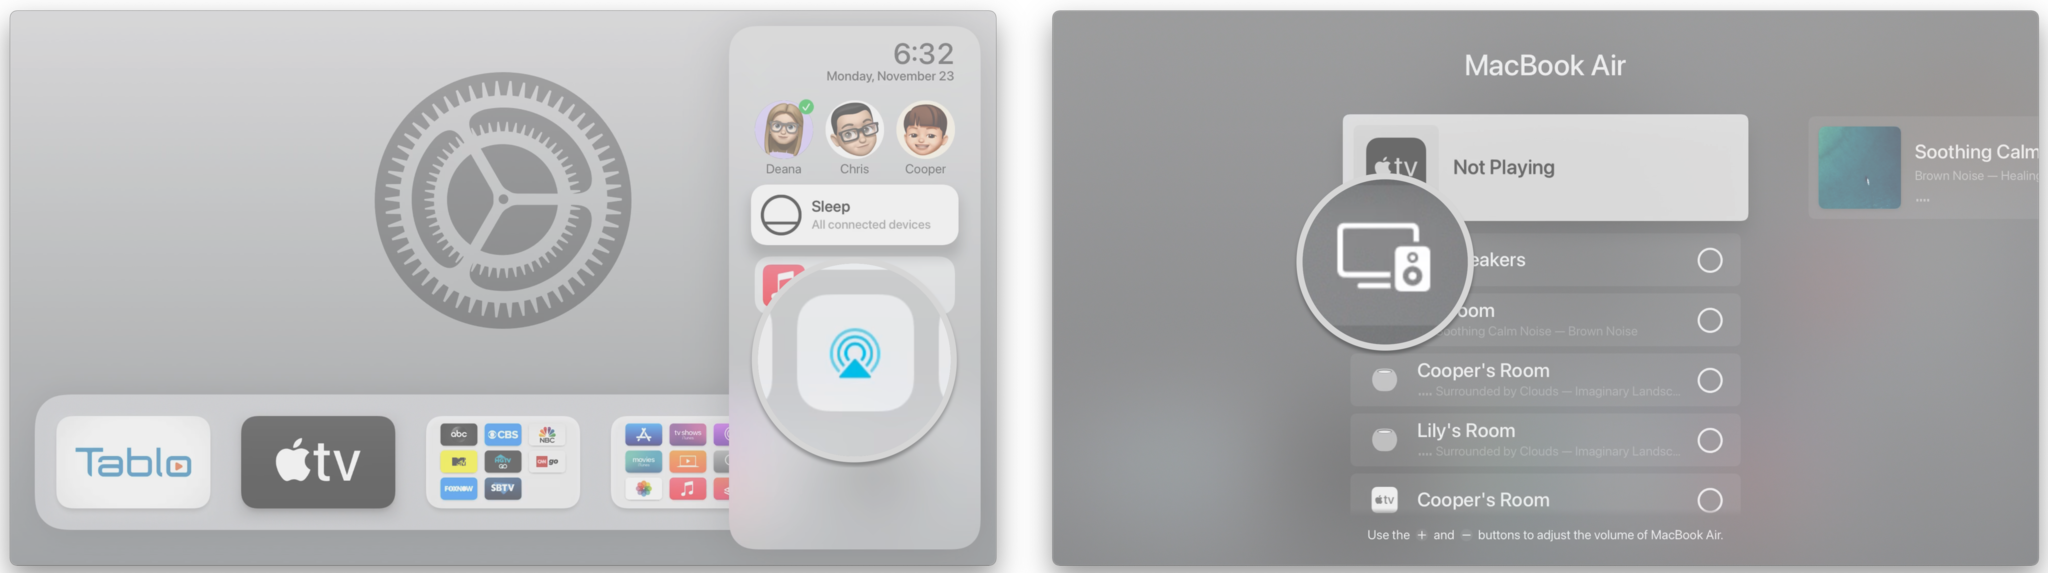 How to stop HomePod or HomePod mini with Apple TV via AirPlay: Hold down the Home button on the Siri remote for 3 seconds, Click the AirPlay icon, Select your TV speaker with a click